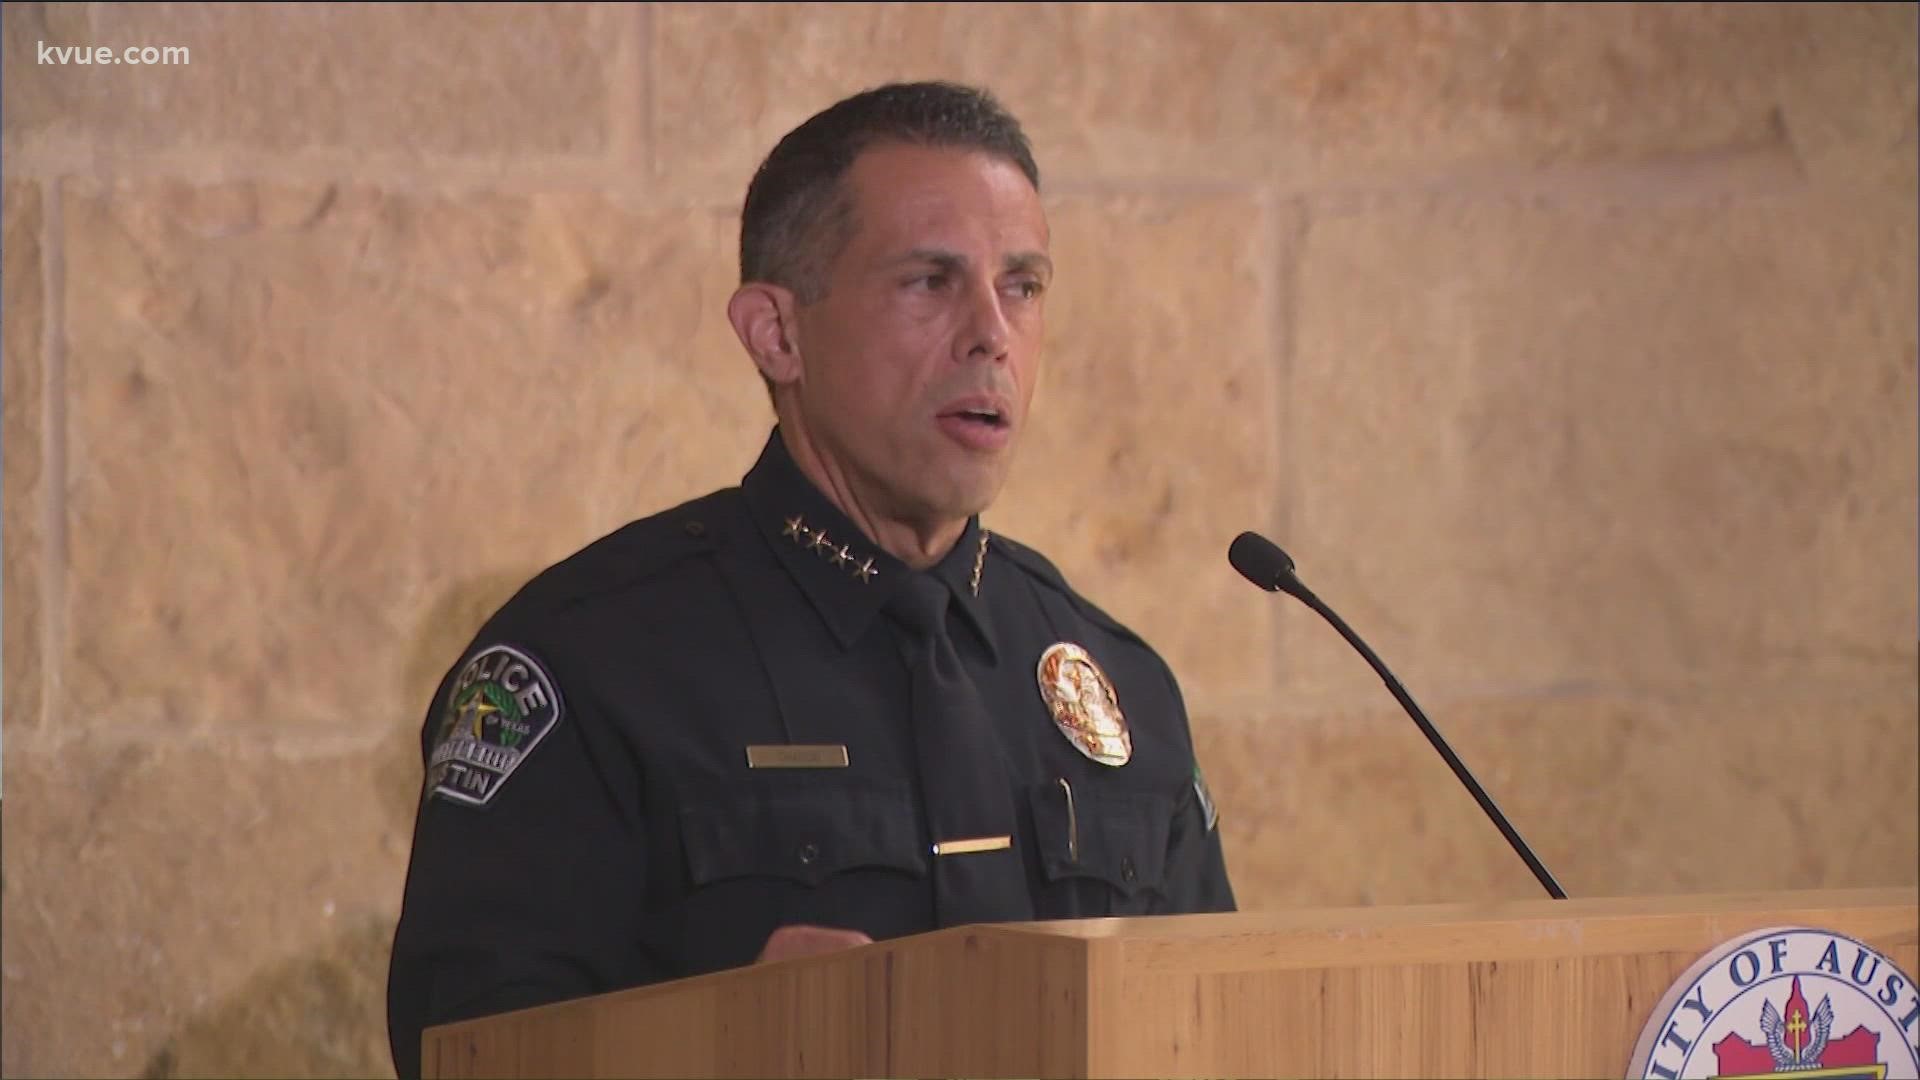 Interim Police Chief Joseph Chacon has been selected to serve as the next chief of police.